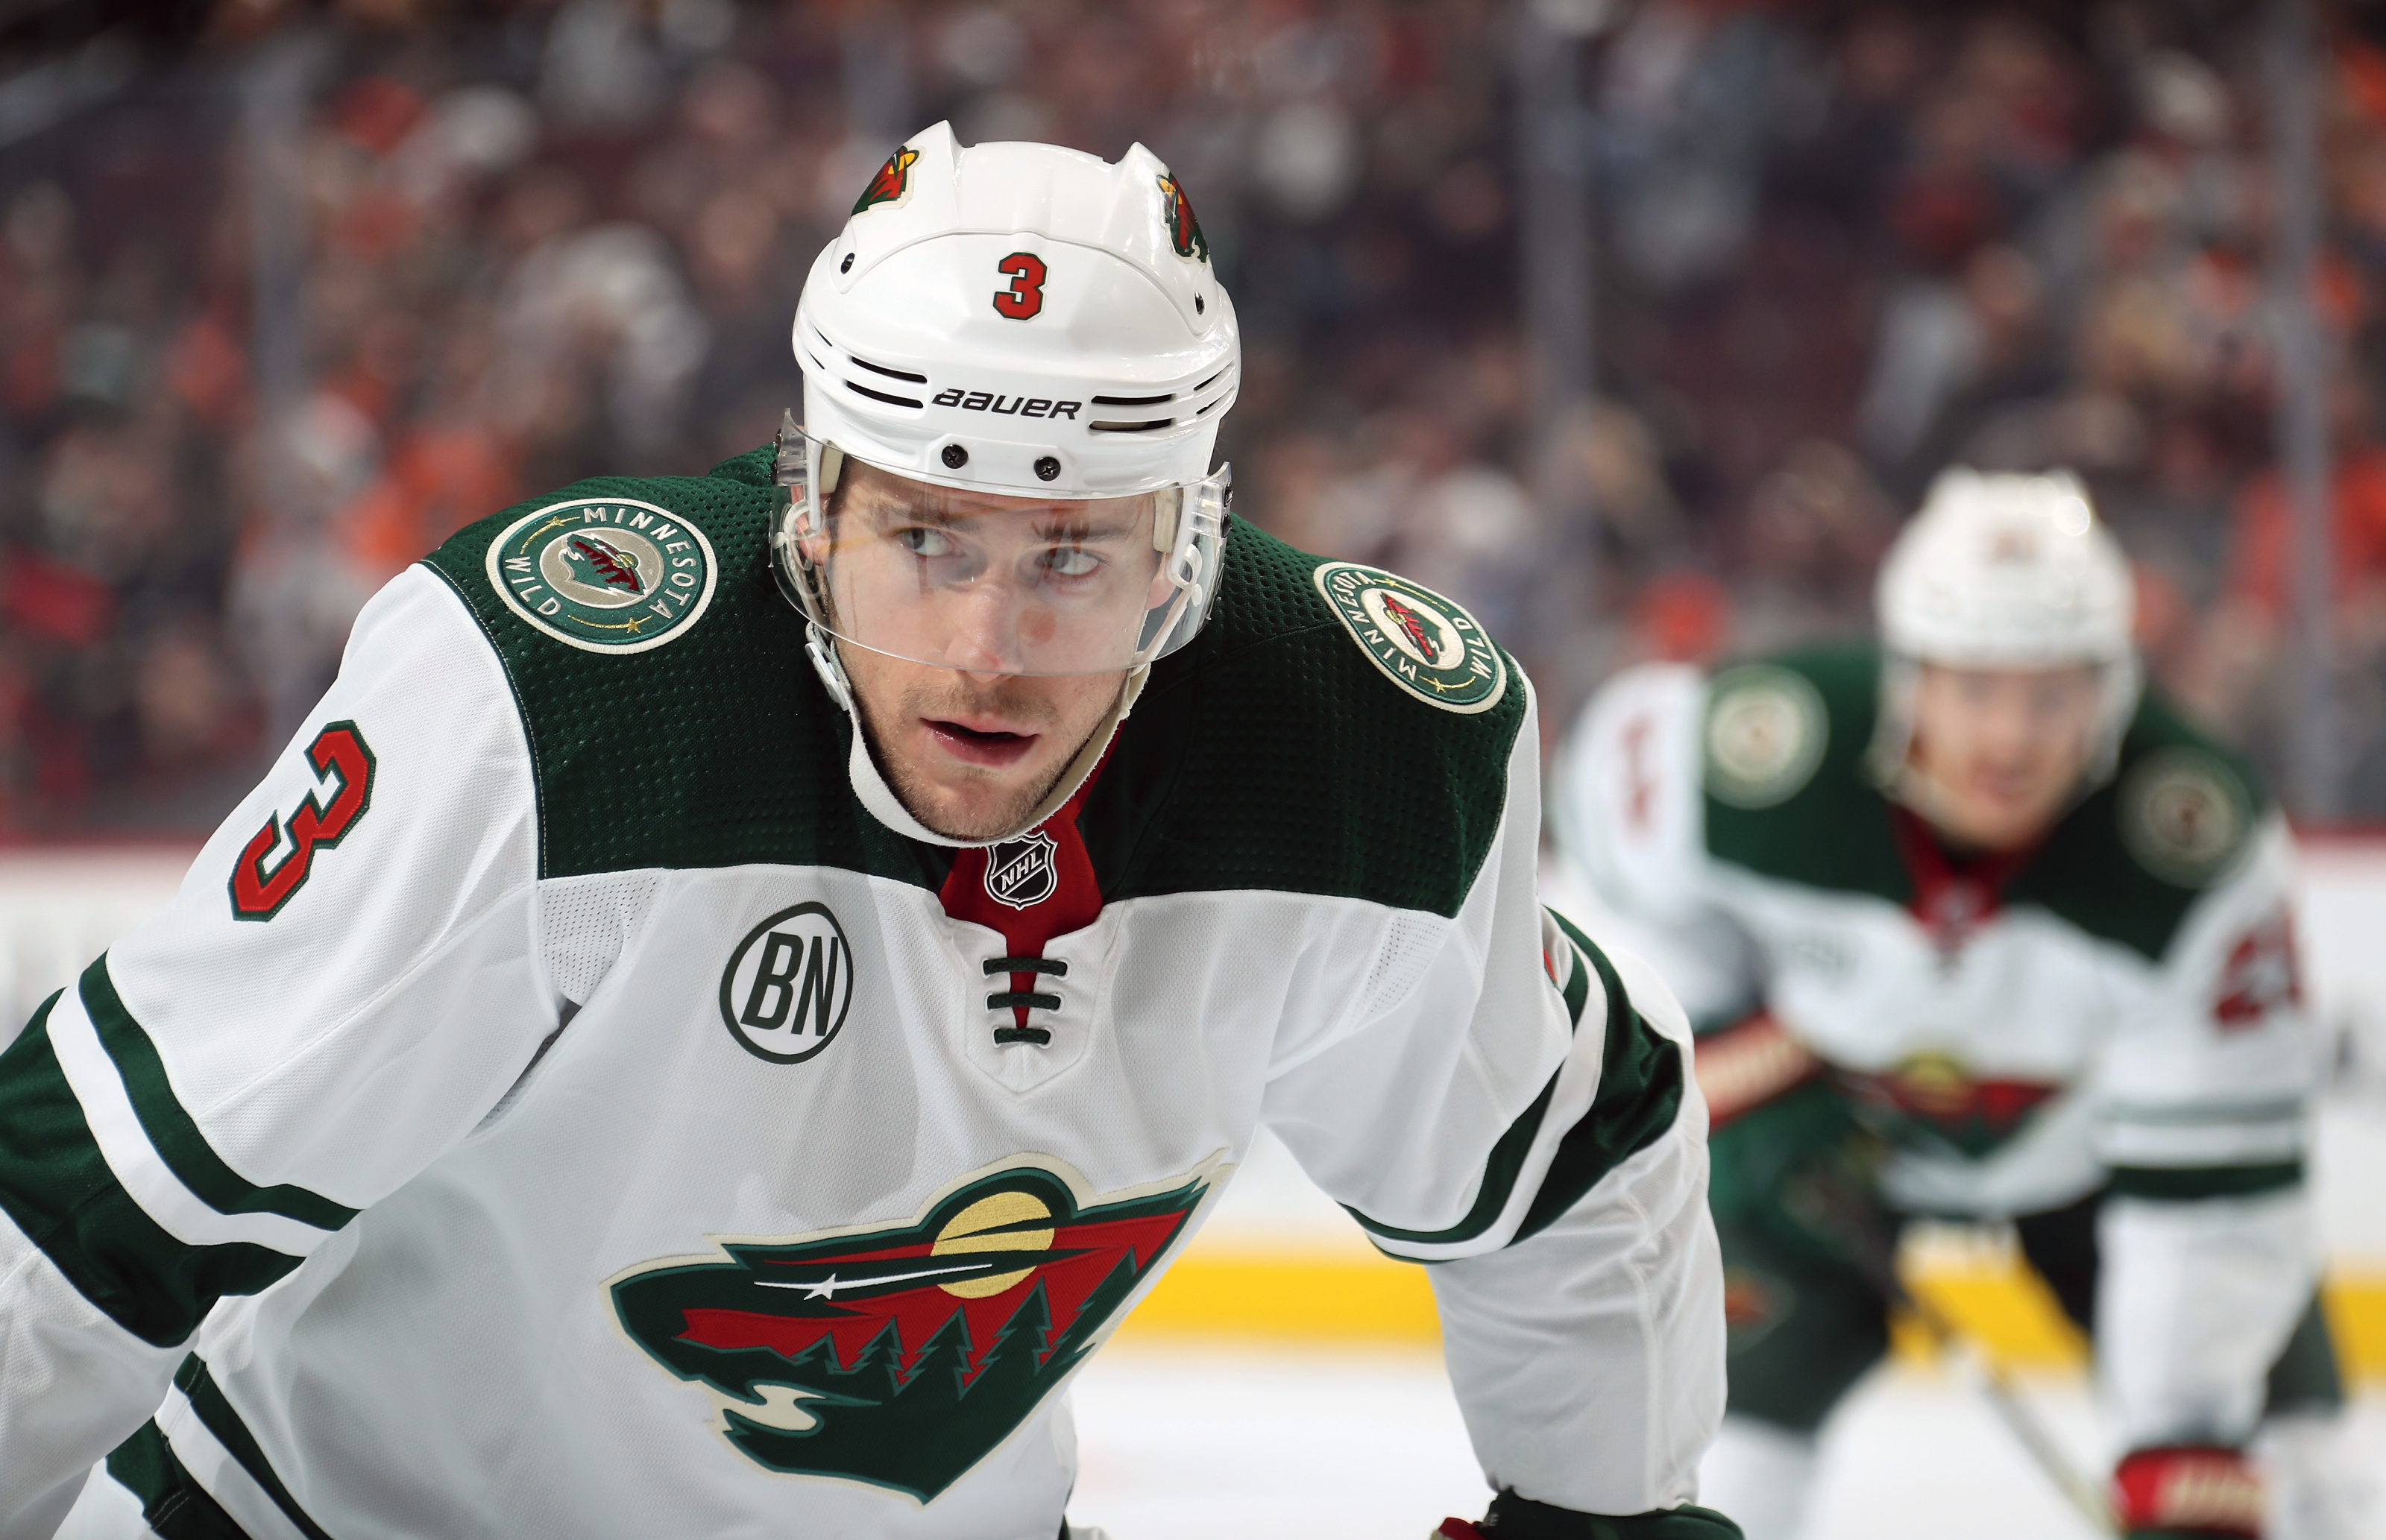 Minnesota Wild: Could the Boston Bruins be in for Charlie Coyle?